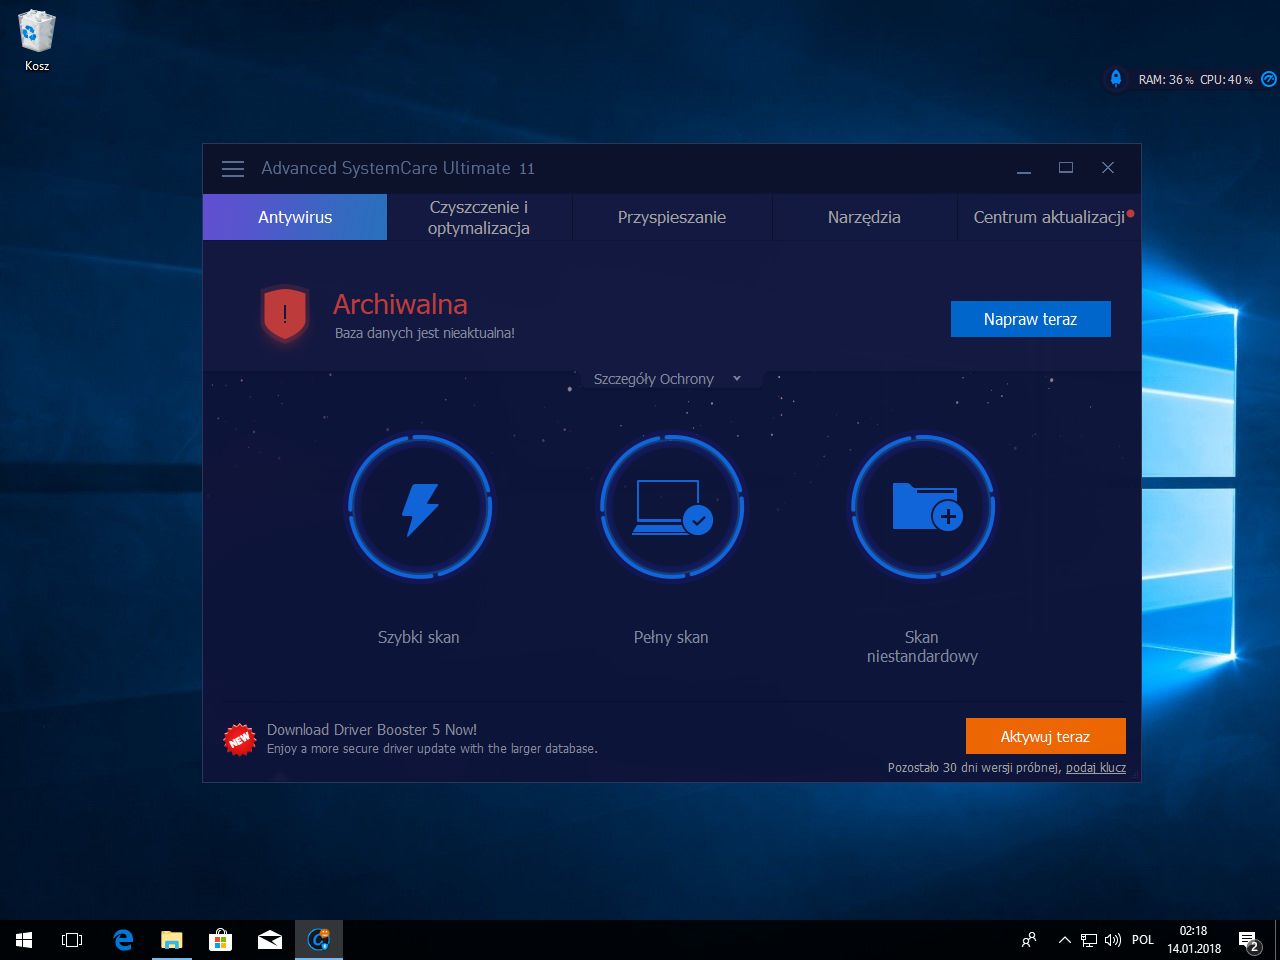 advanced systemcare ultimate free download for windows 10